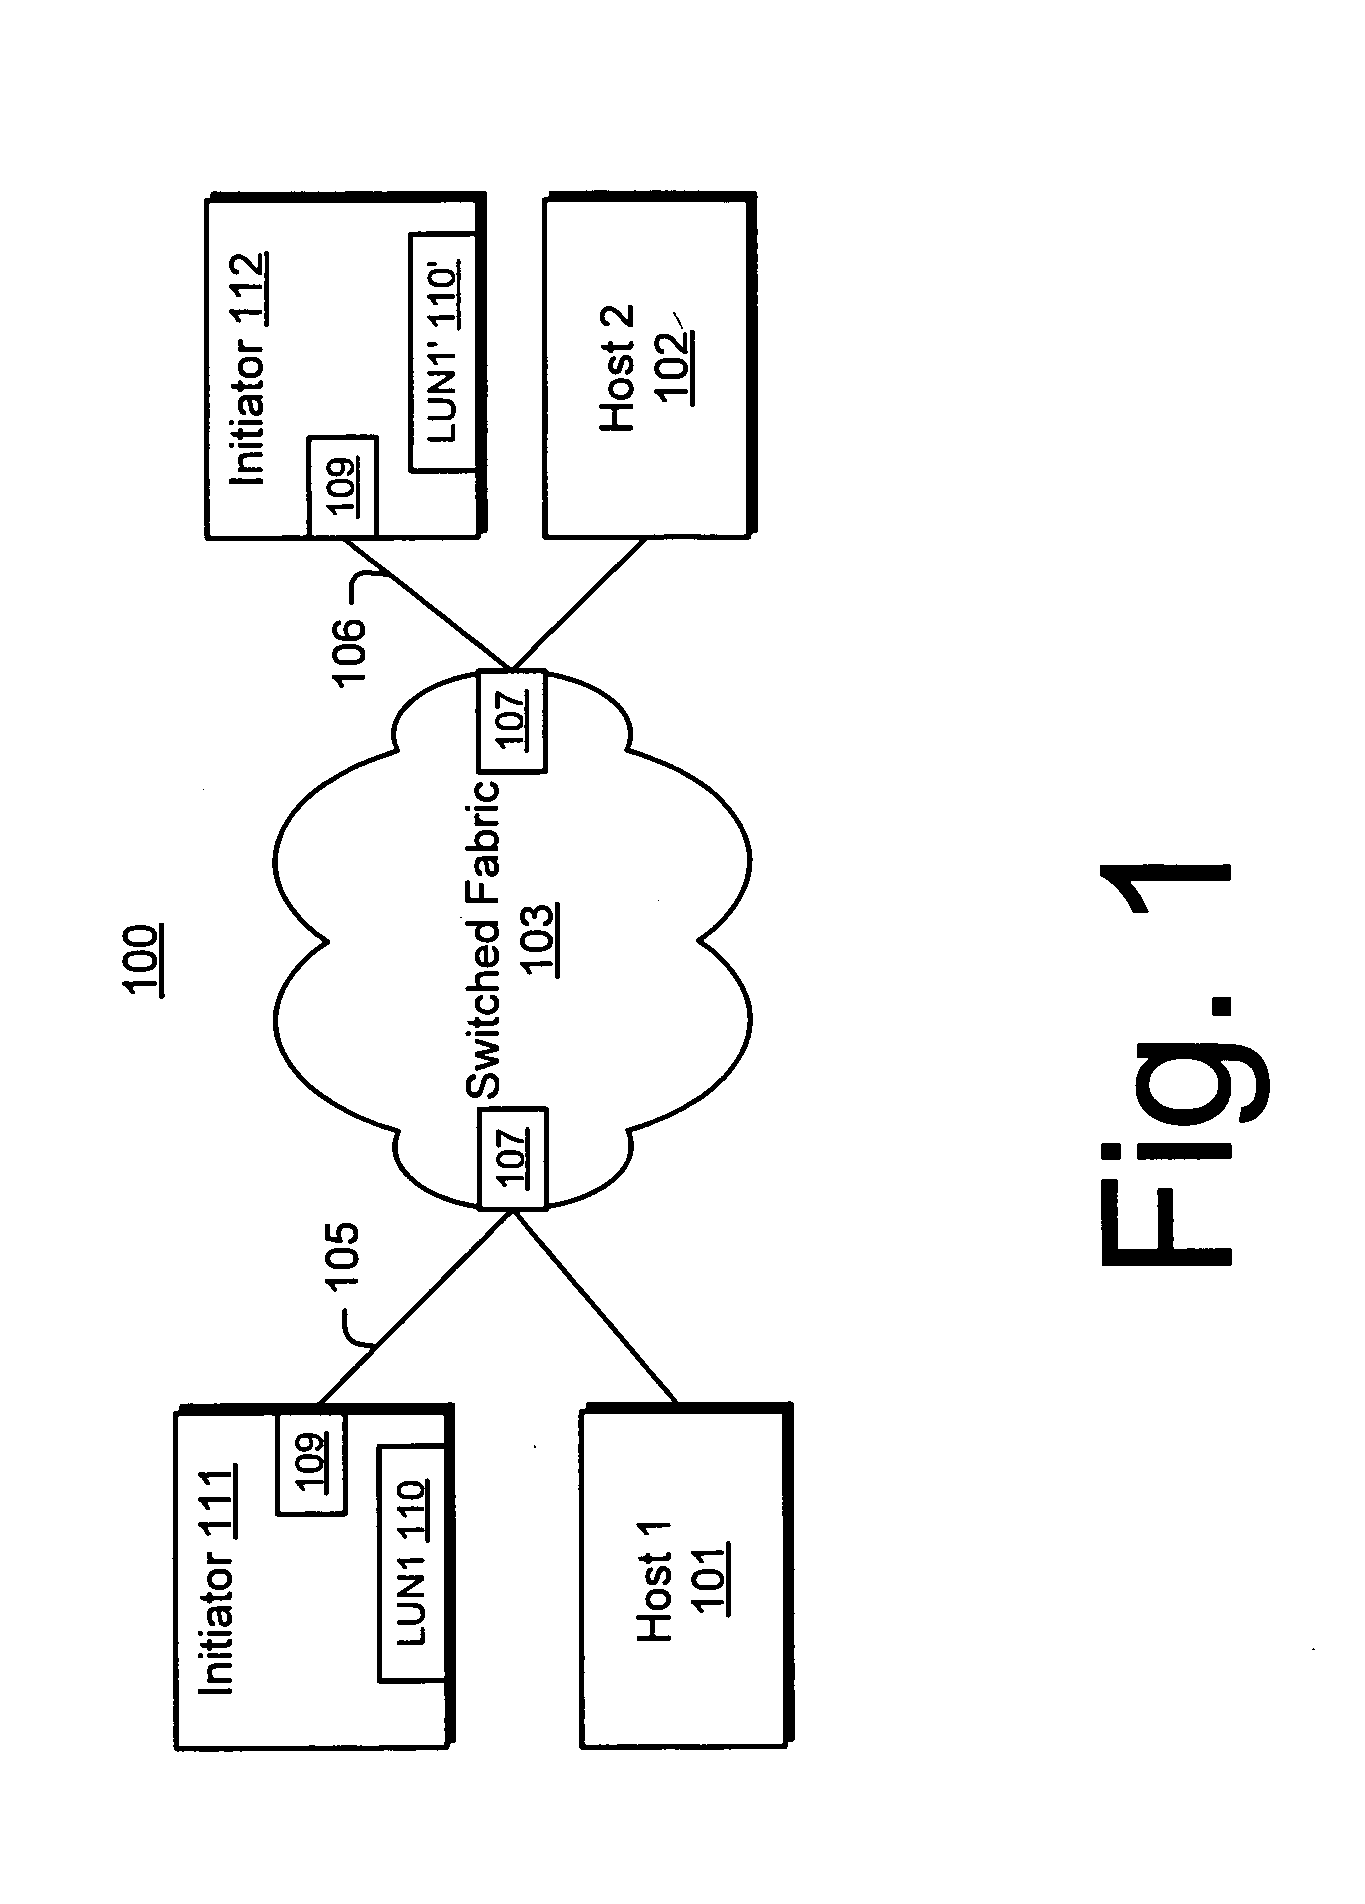 Method for transaction log failover merging during asynchronous operations in a data storage network